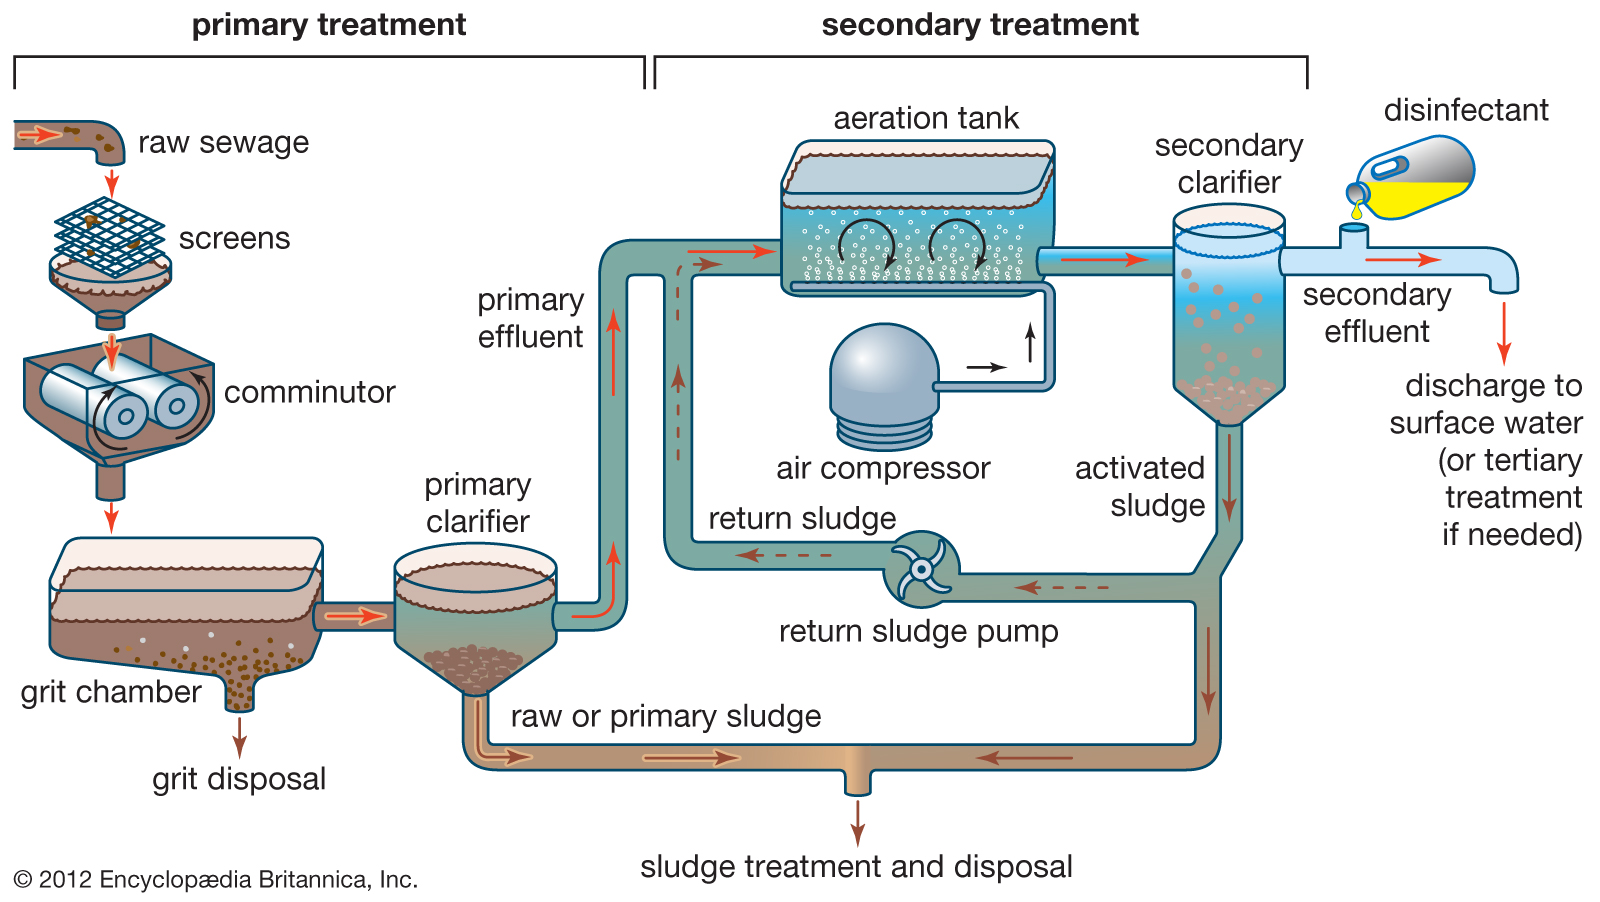 Septic Tank – Sewage Treatment Plants Bring Safety to Public Health and the Environment